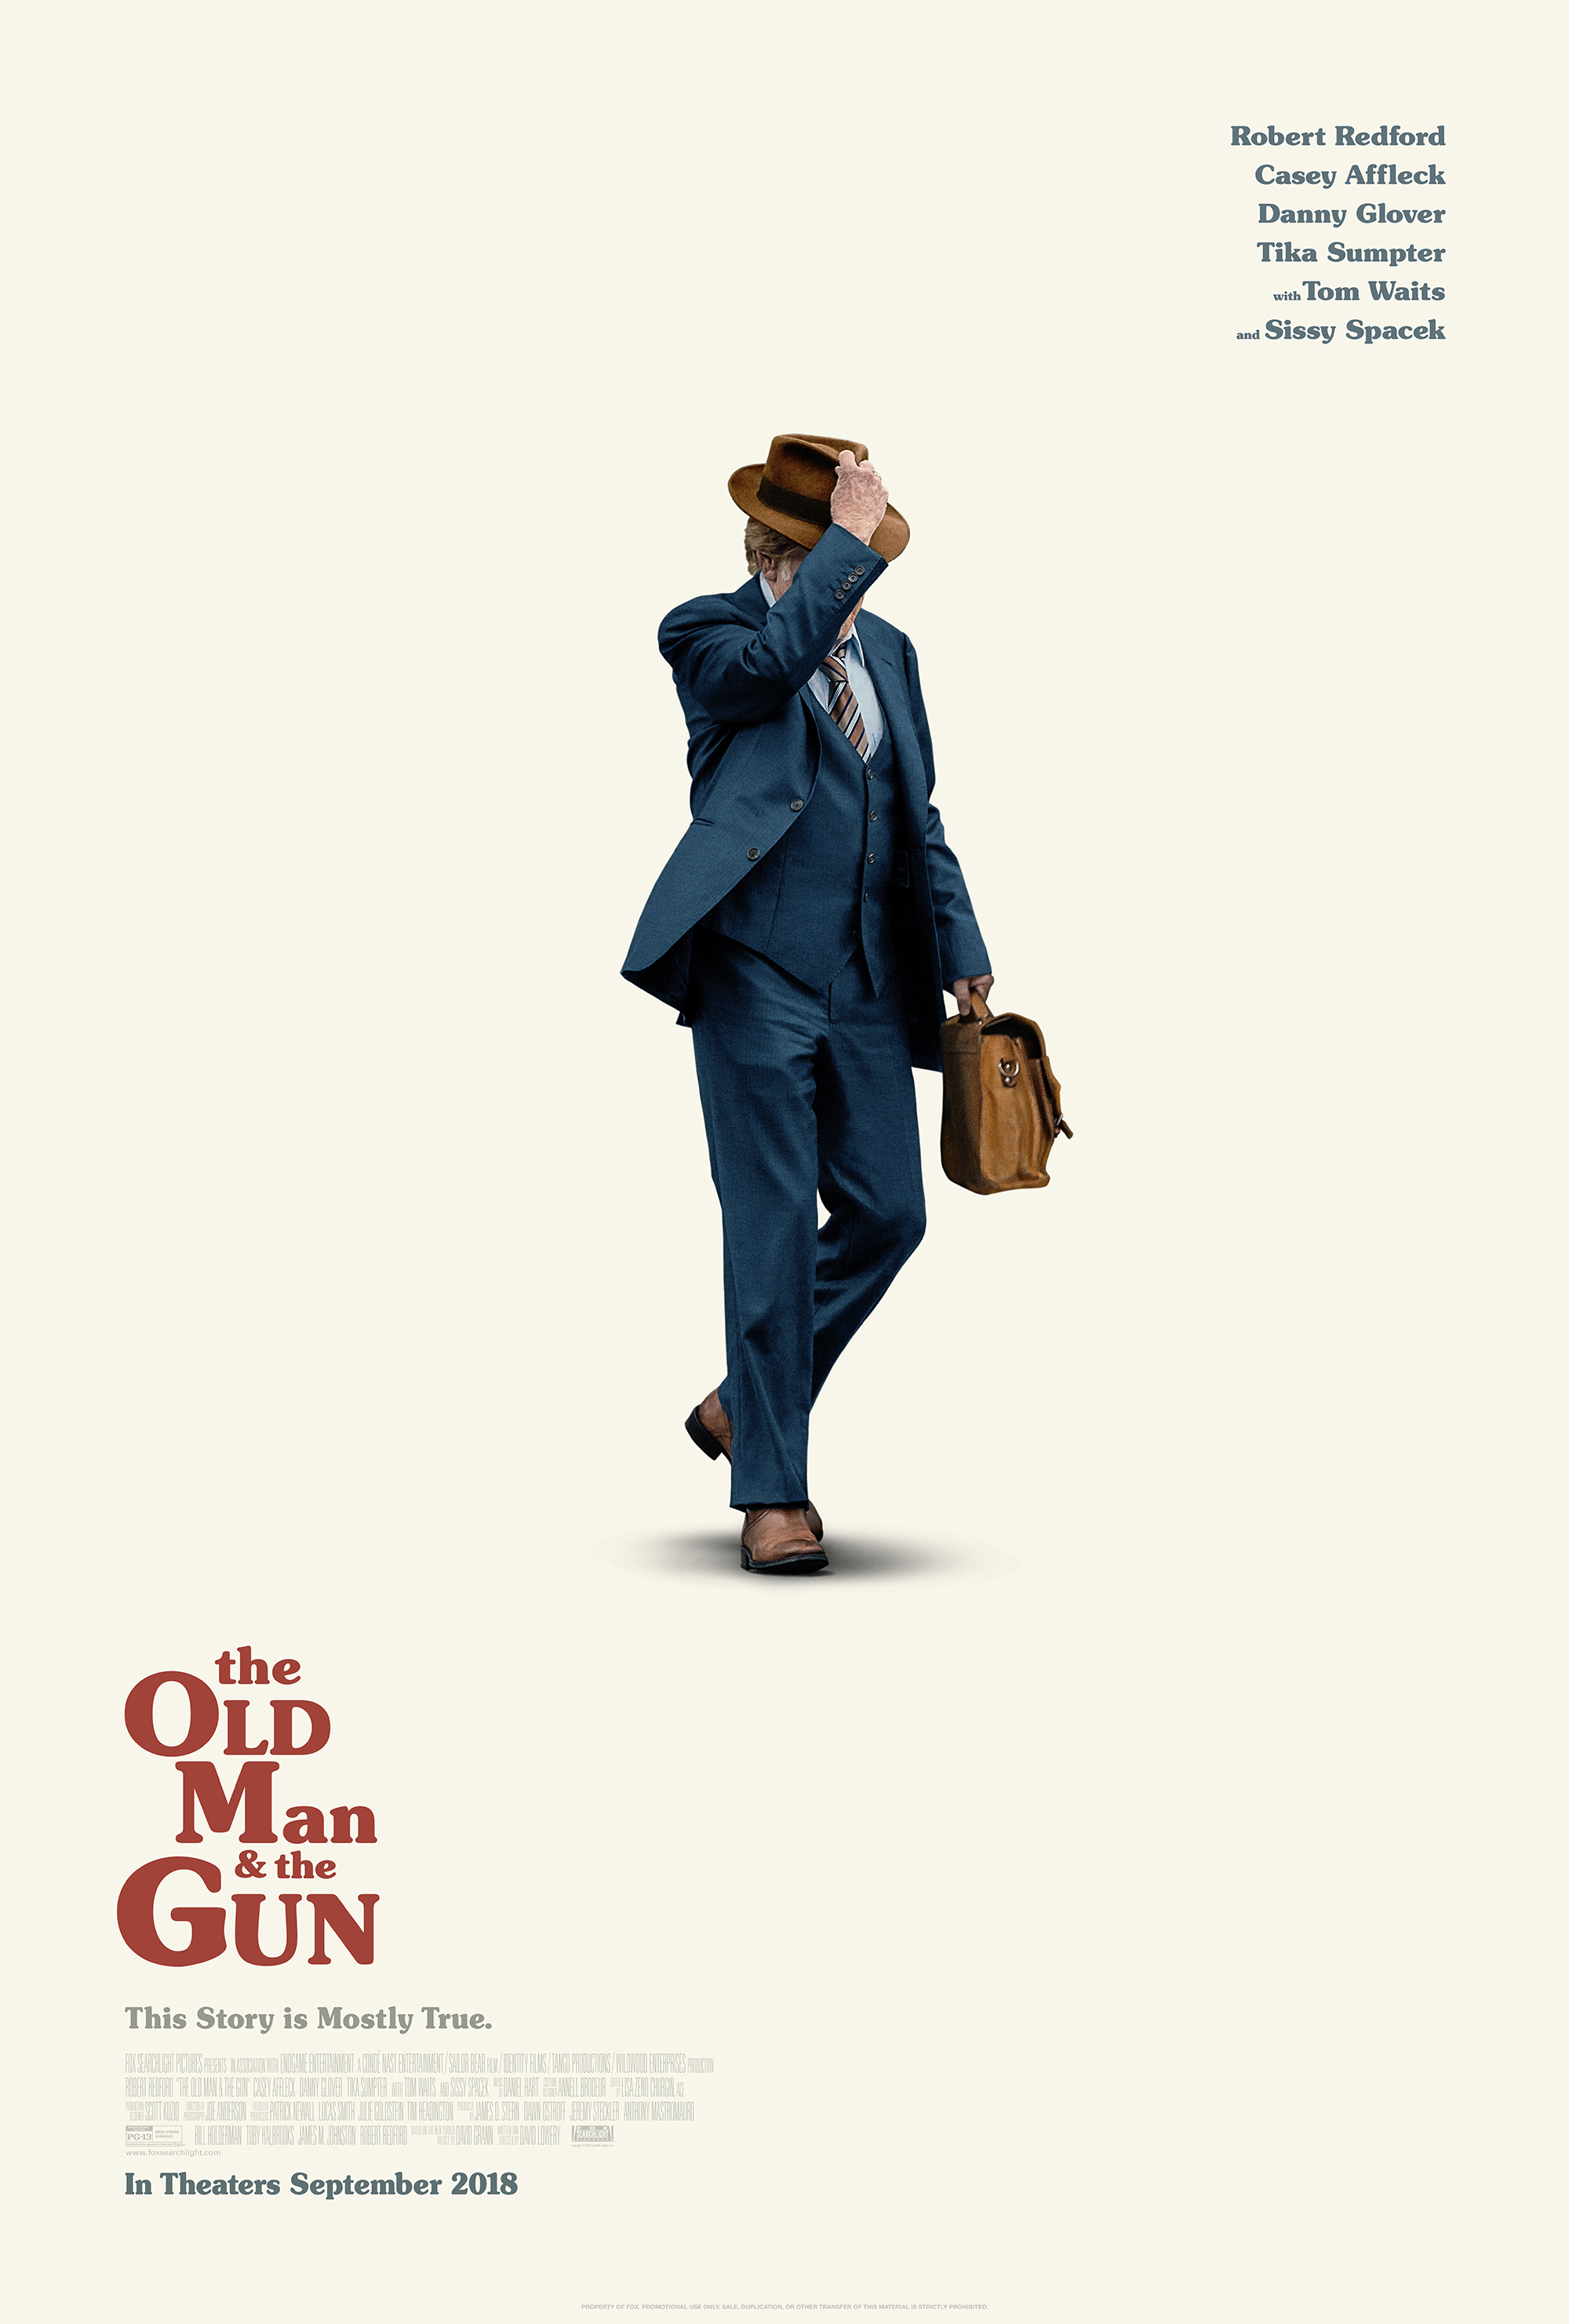 The Old Man & The Gun poster (Fox Searchlight)